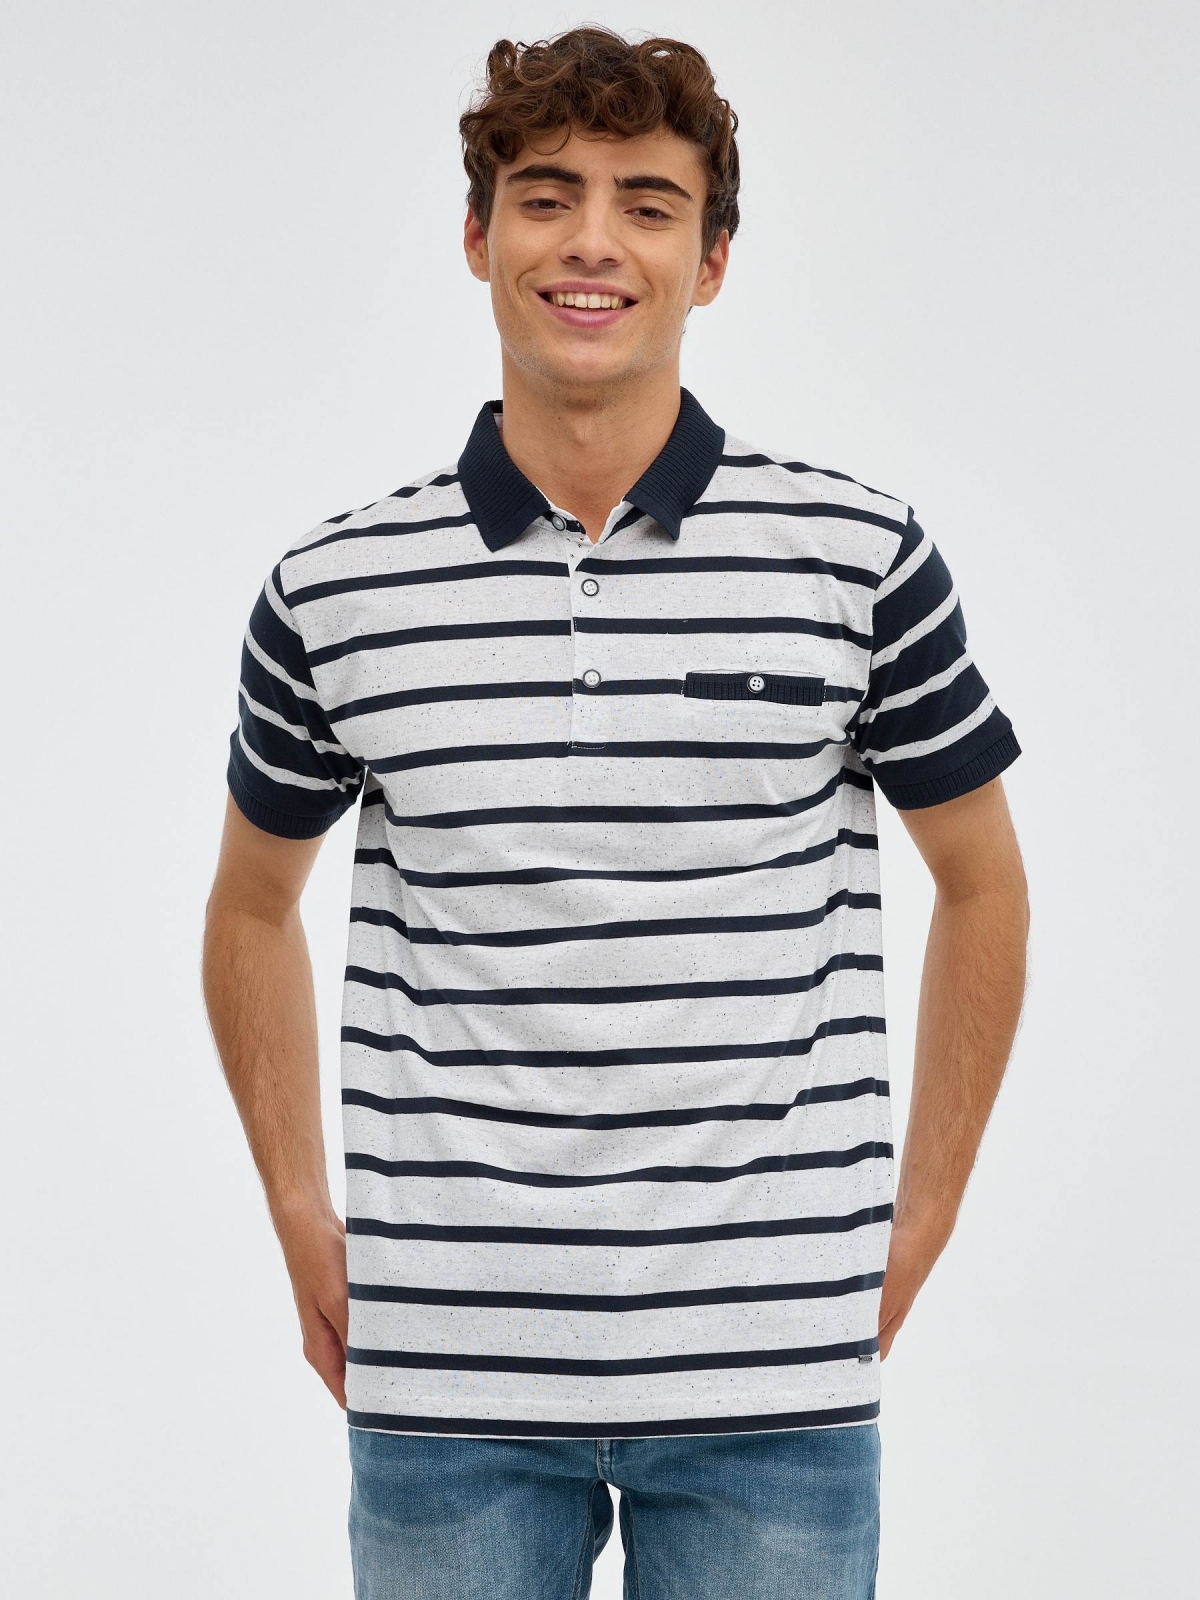 Sailor striped polo shirt white middle front view